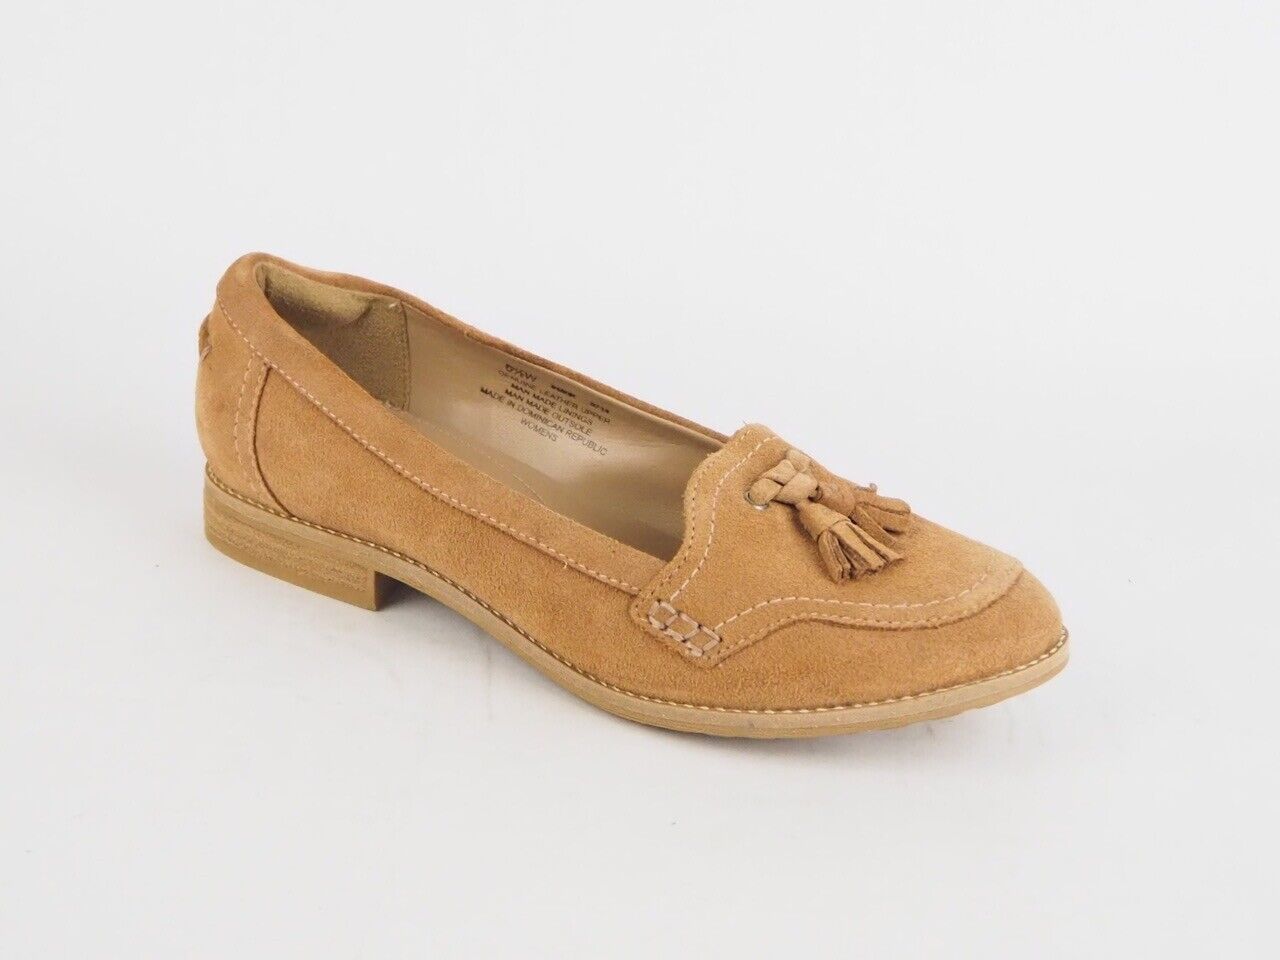 Womens Timberland Thayer RFD Suede 8150R Wheat Leather Slip On Casual Loafers - London Top Style